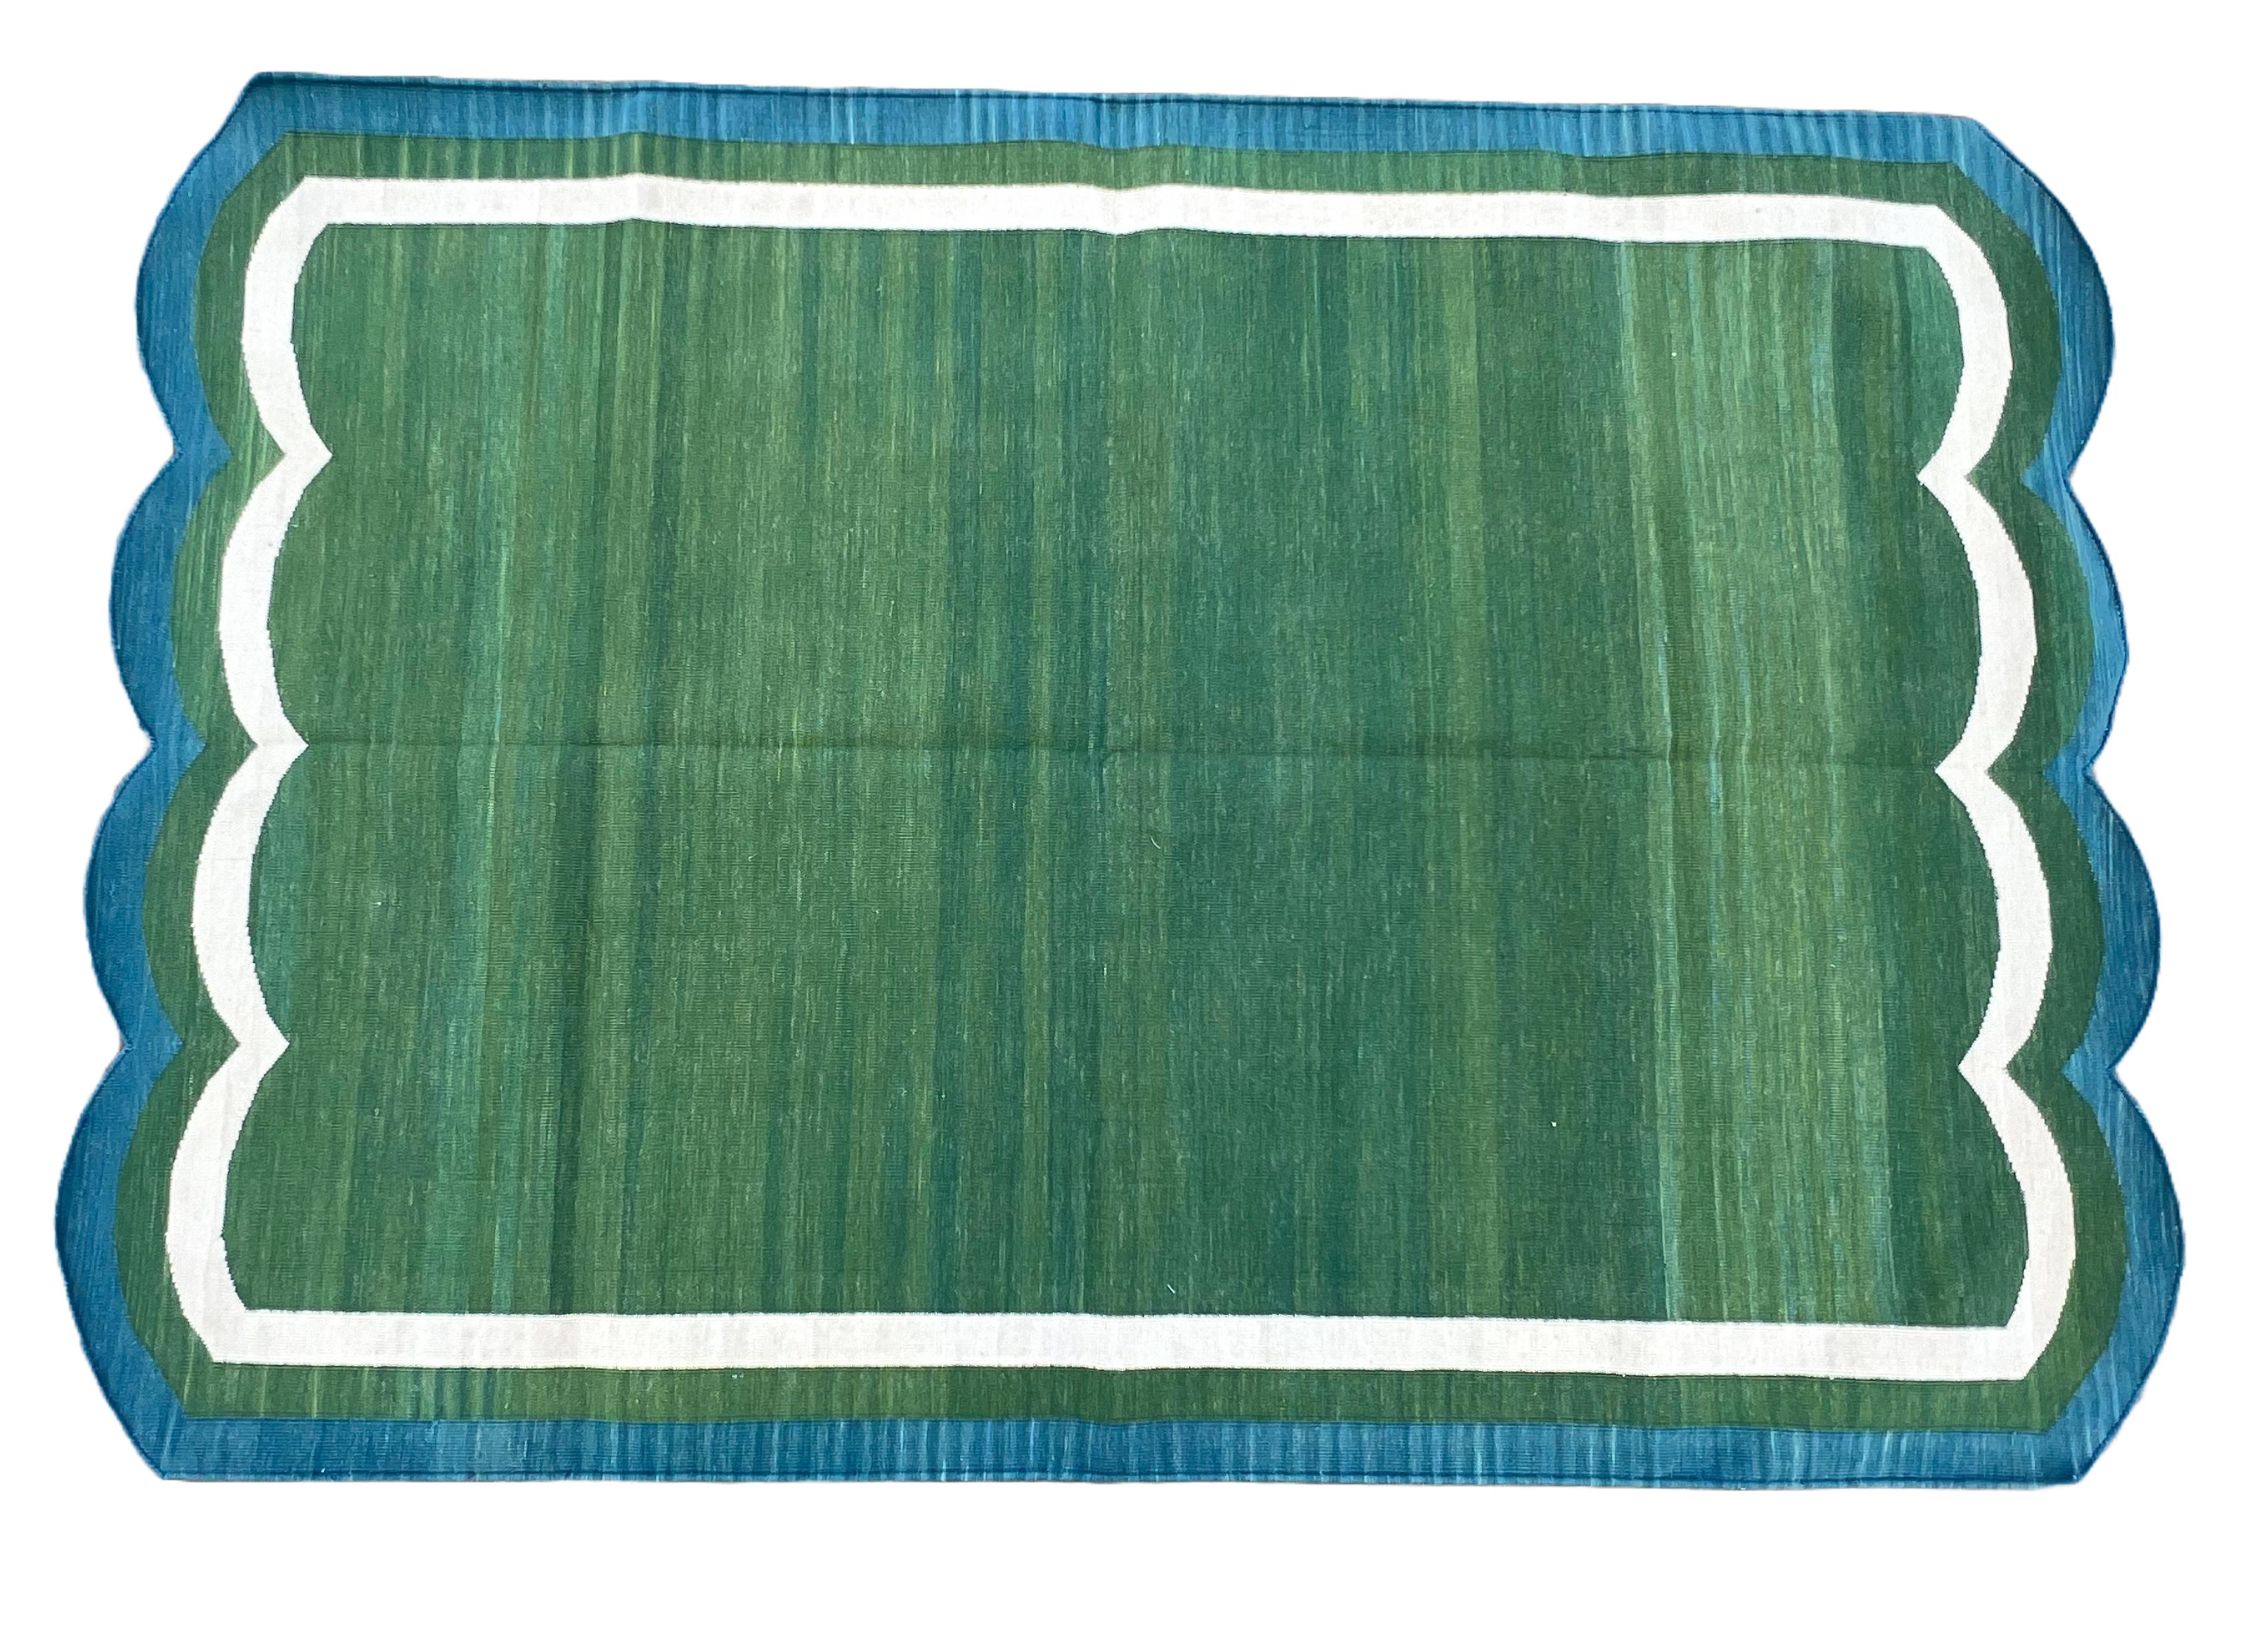 Arts and Crafts Handmade Cotton Area Flat Weave Rug, Green & Teal Blue Scalloped Indian Dhurrie For Sale